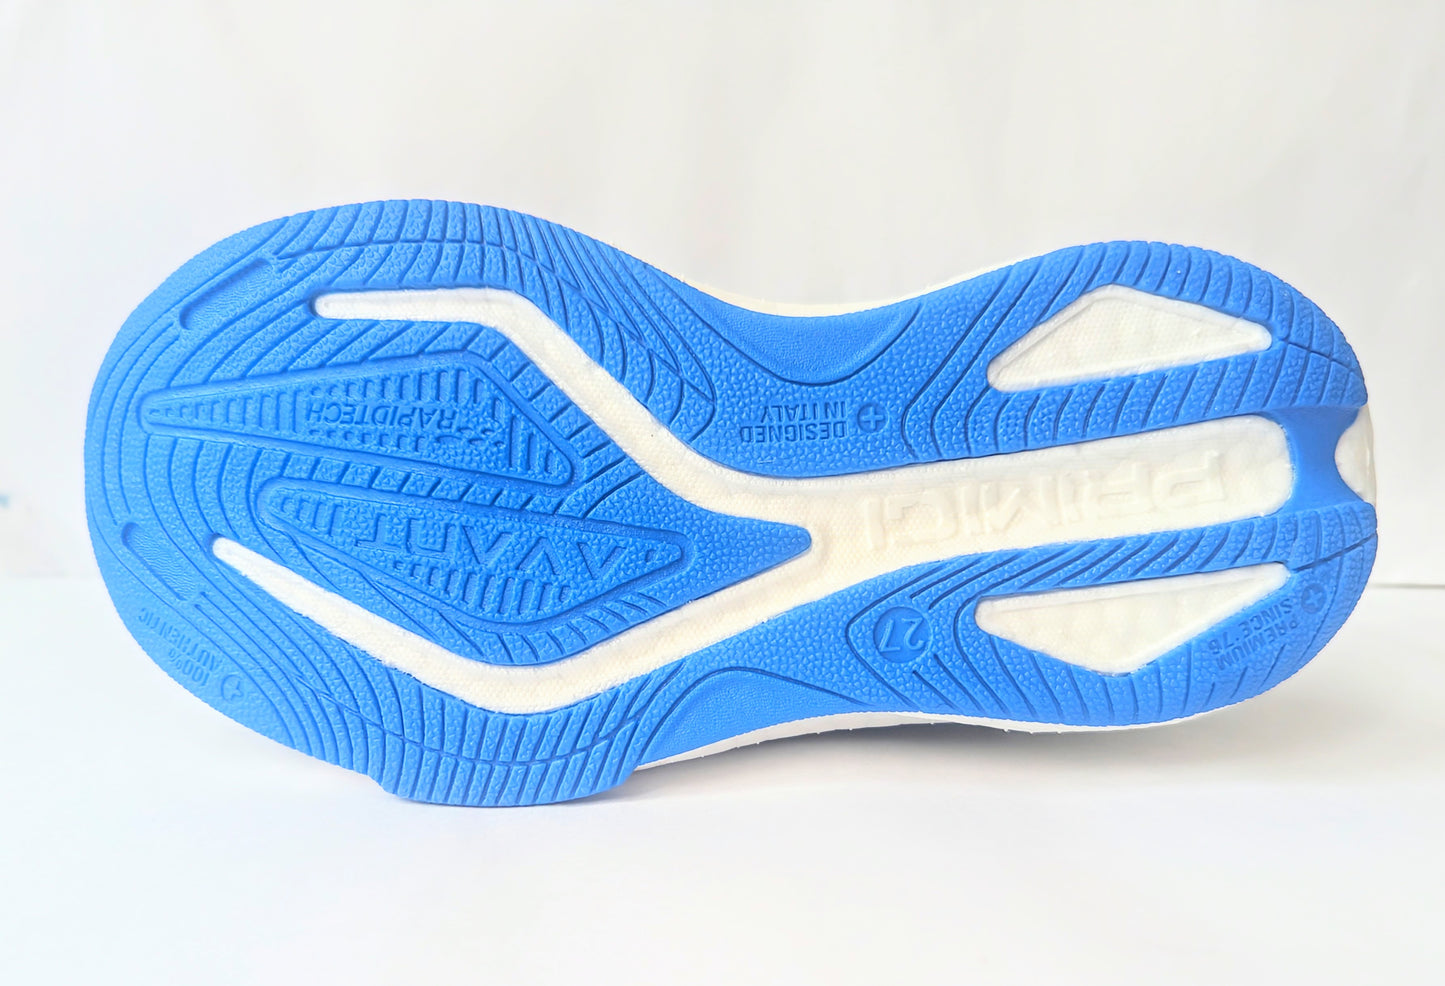 A boys trainer by Primigi, style B&G Rapid 4962511, in navy and blue with elastic lace and velcro fastening. Sole view.